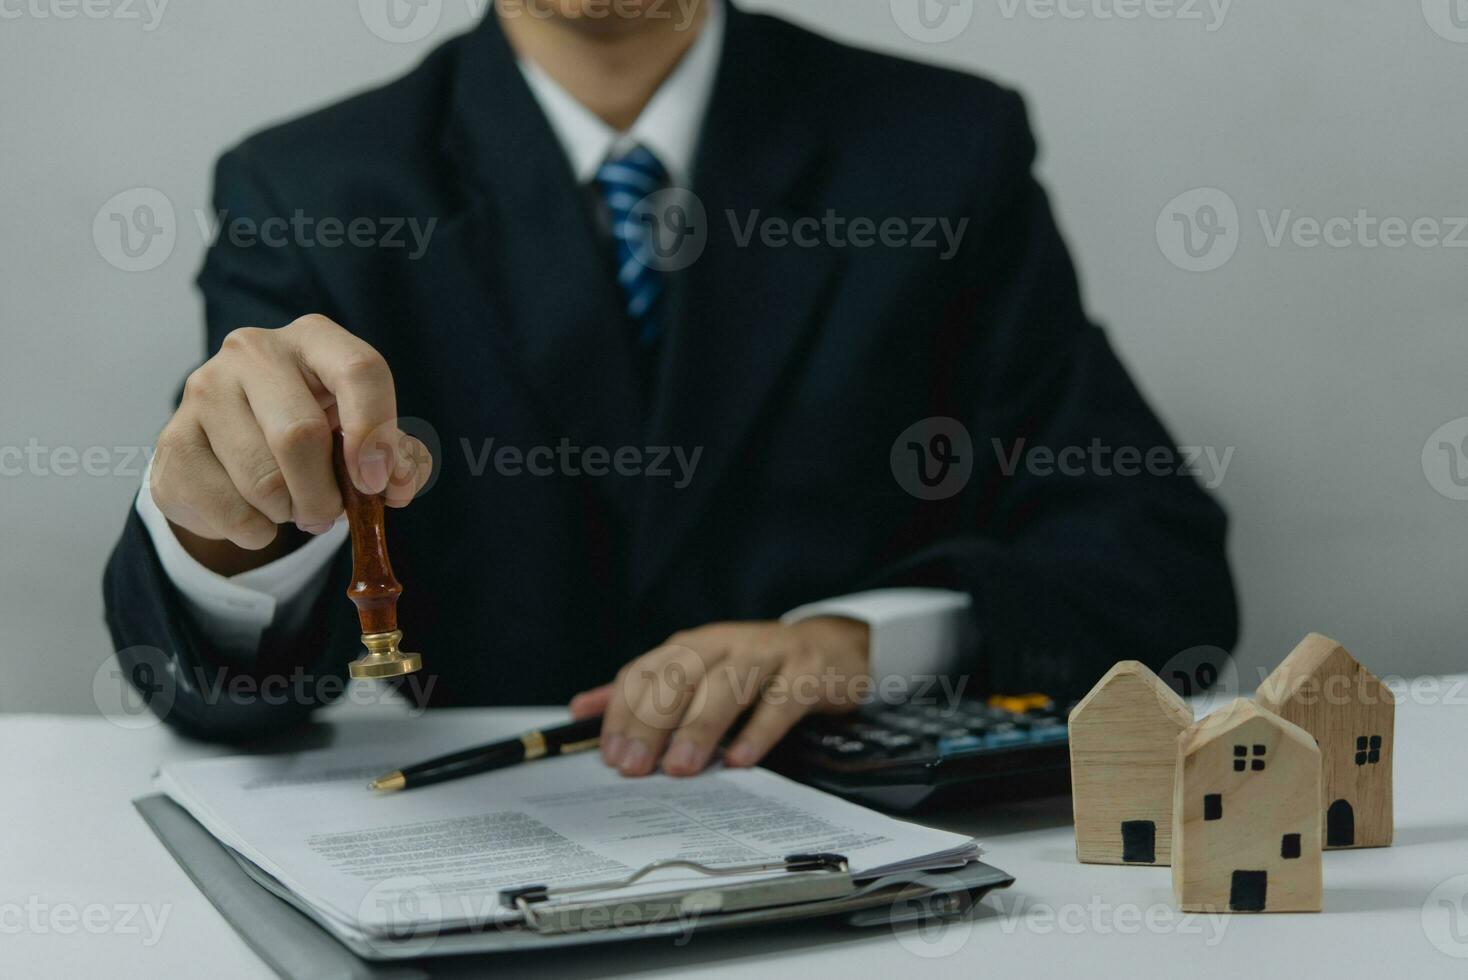 Man approving documents finance, banking, investments, marketing on desk. contract law, or rubber stamping business real estate documents, and other official and legal contracts and agreements. photo